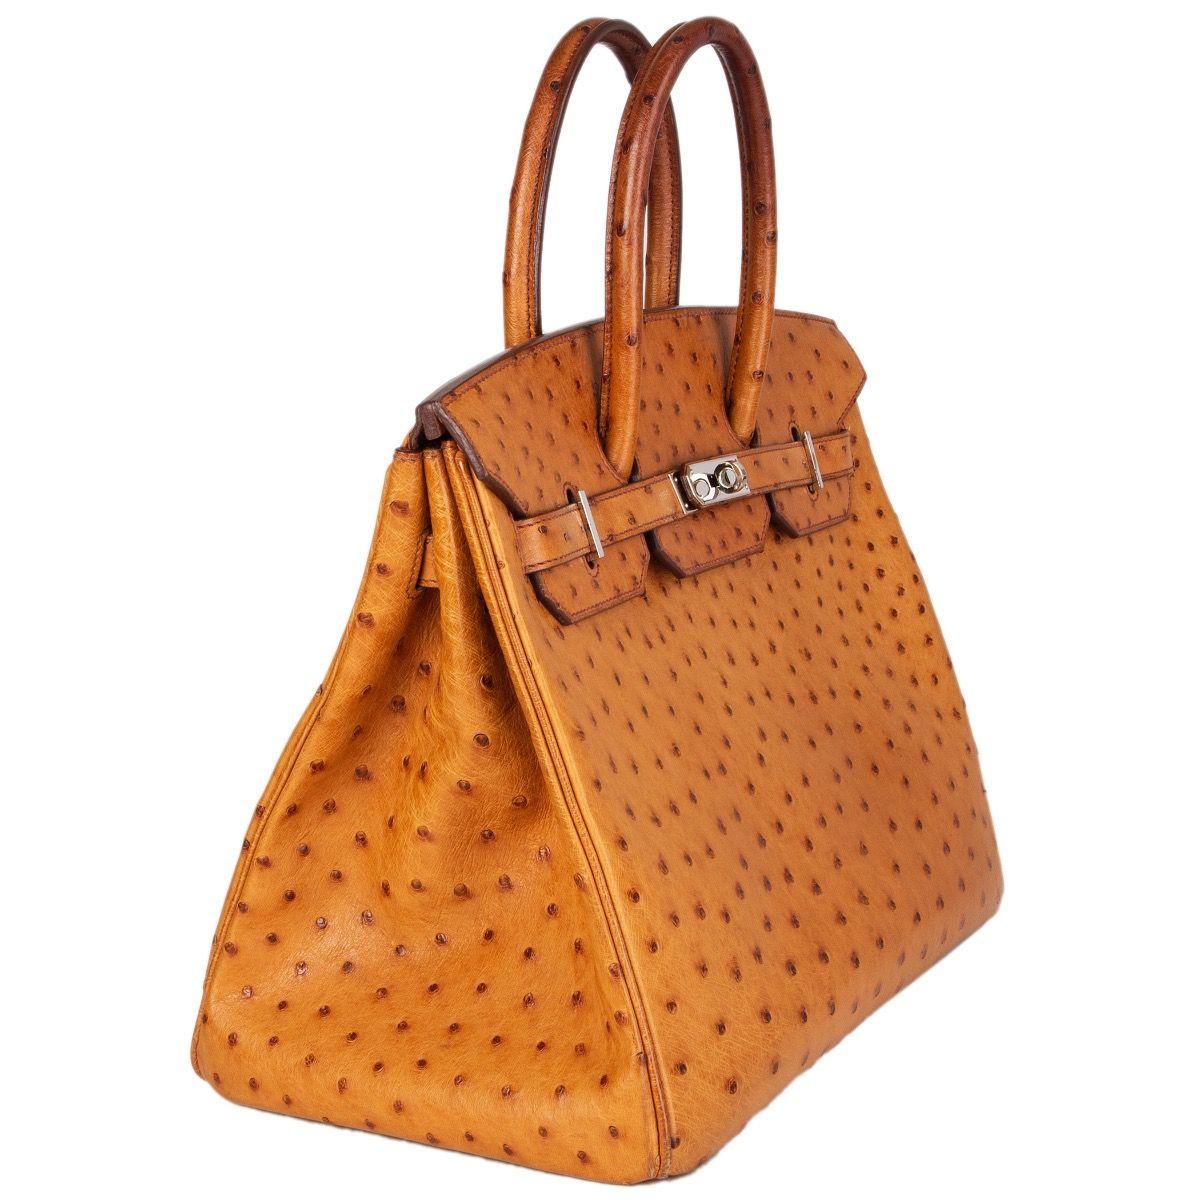 Hermès 'Birkin 35' bag in Cognac ostrich leather. Lined in Chevre (goat skin) with an open pocket against the front and a zipper pocket against the back. Has been carried with heavy darkening to the handles and soft wear to the bottom corners.